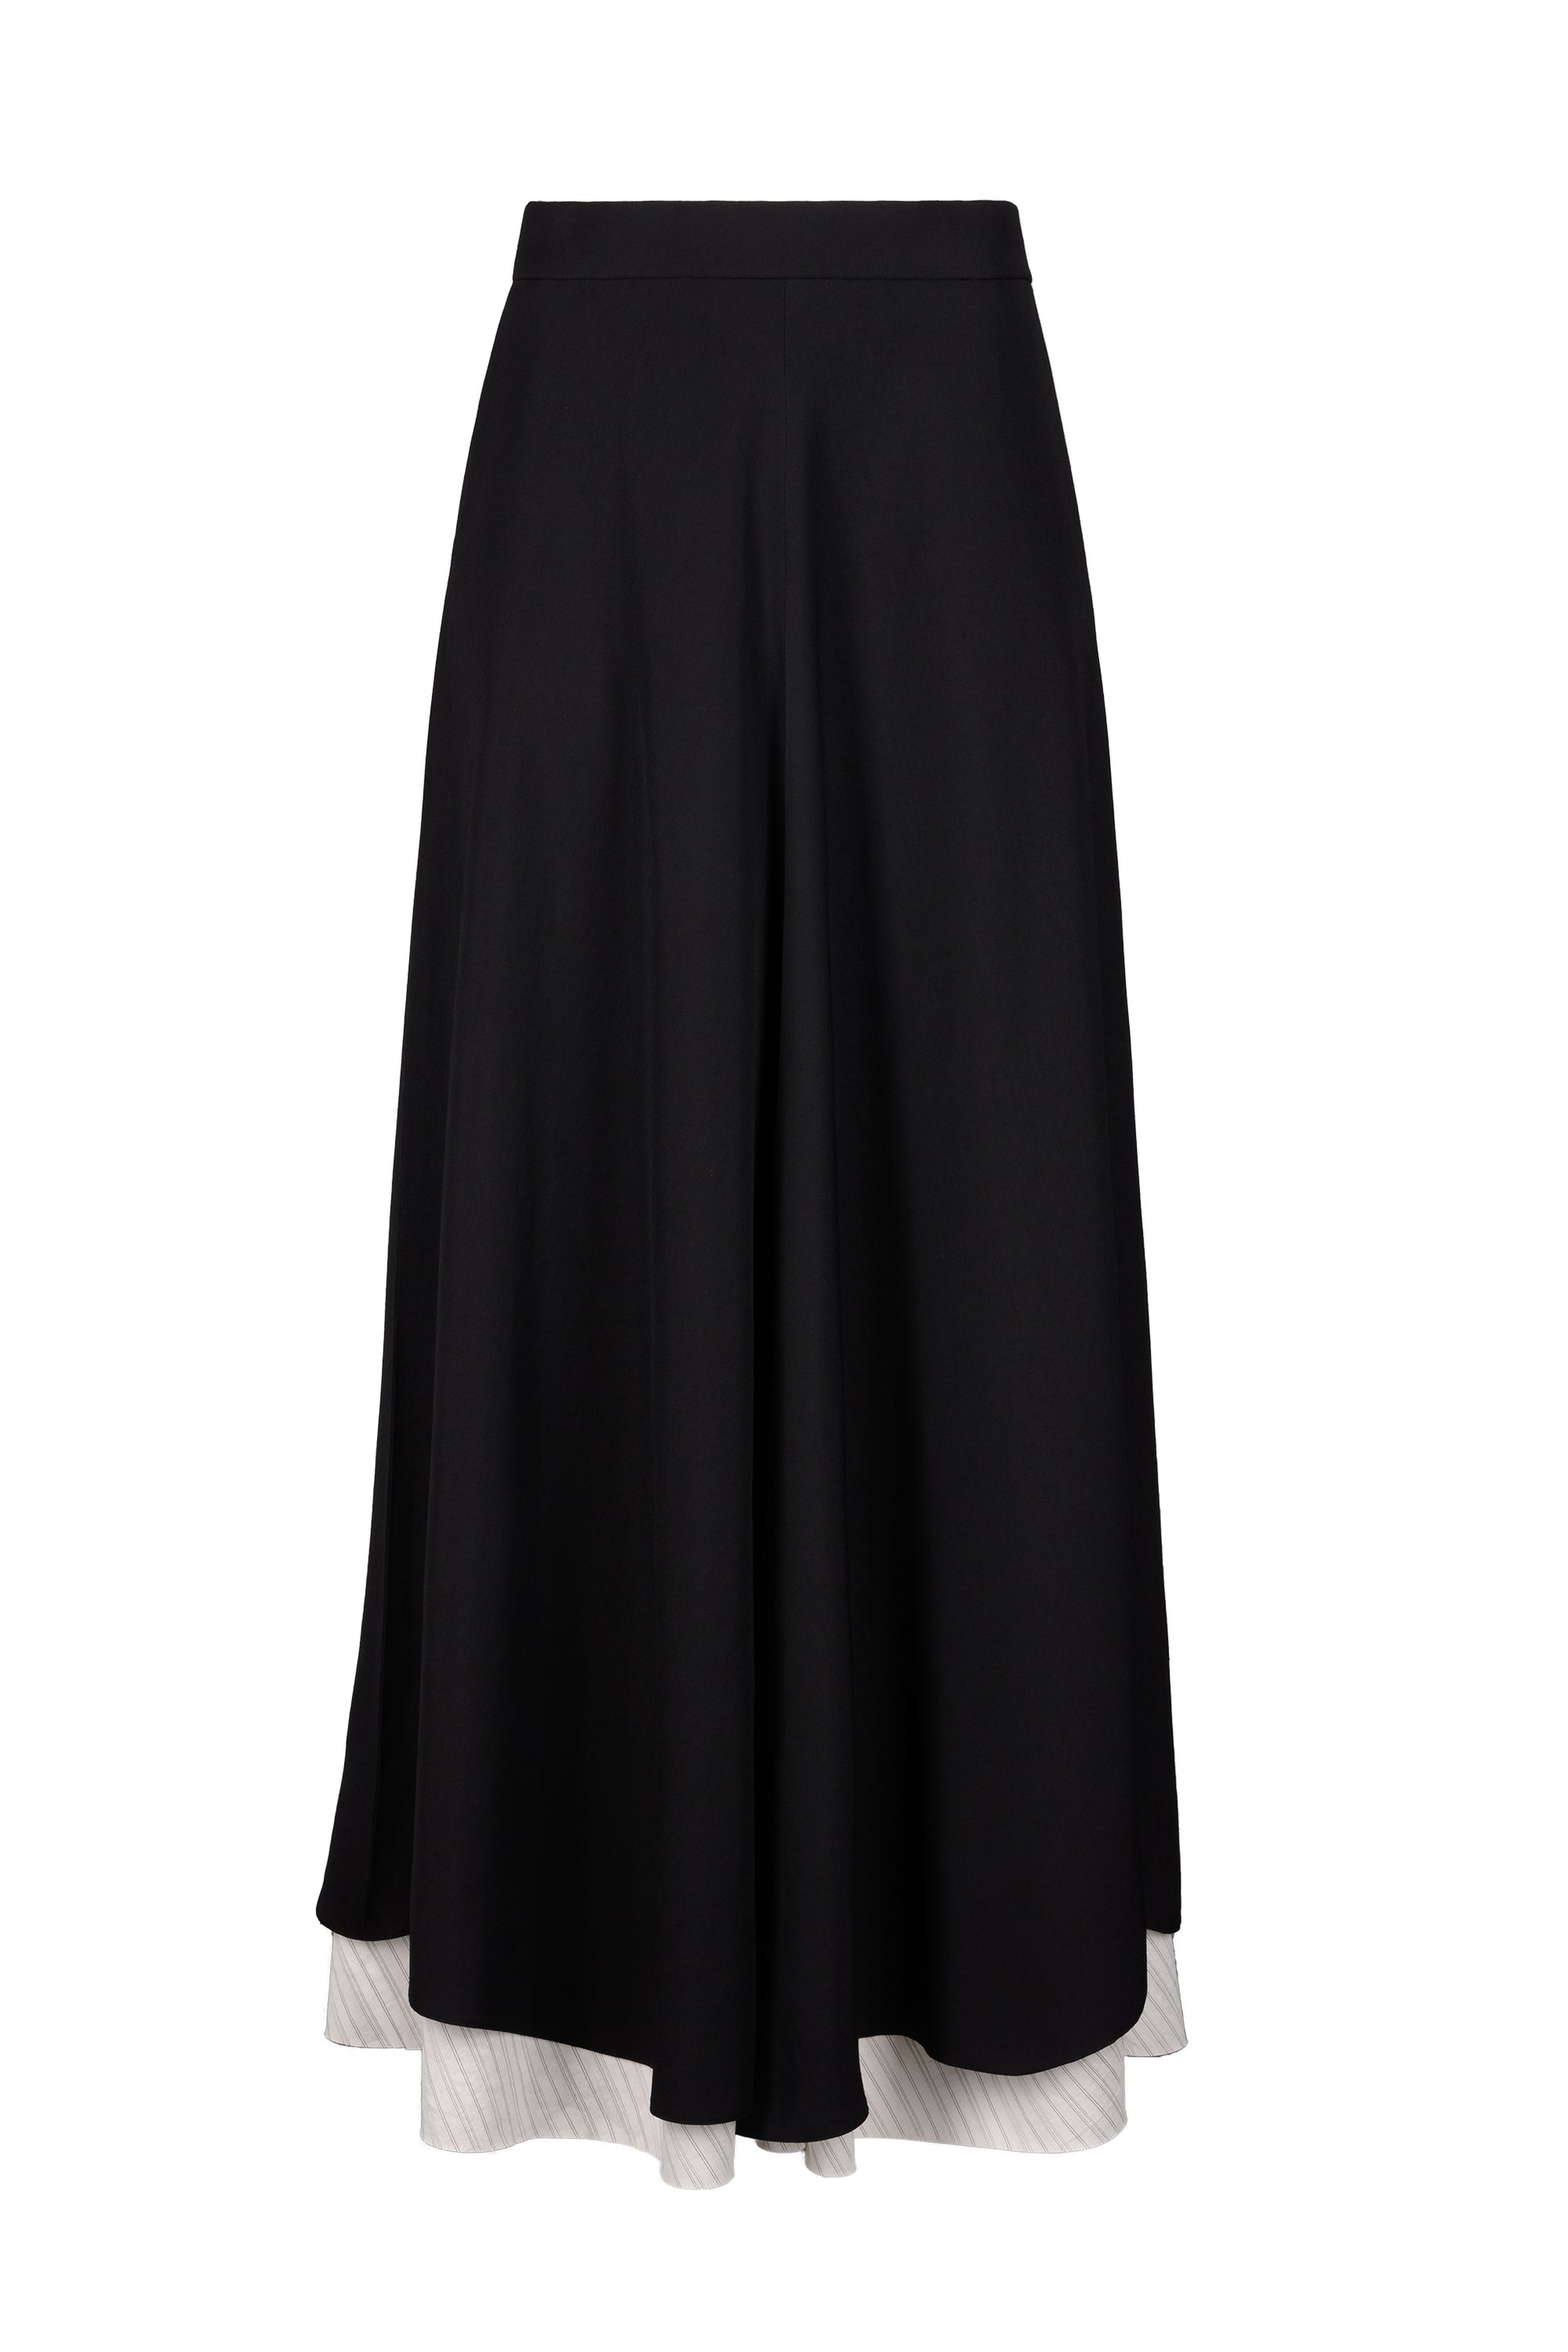 Elegant black Fluid Maxi Skirt with a high-waisted design and cascading hemline, accented by a contrasting light fabric, perfect for versatile styling.